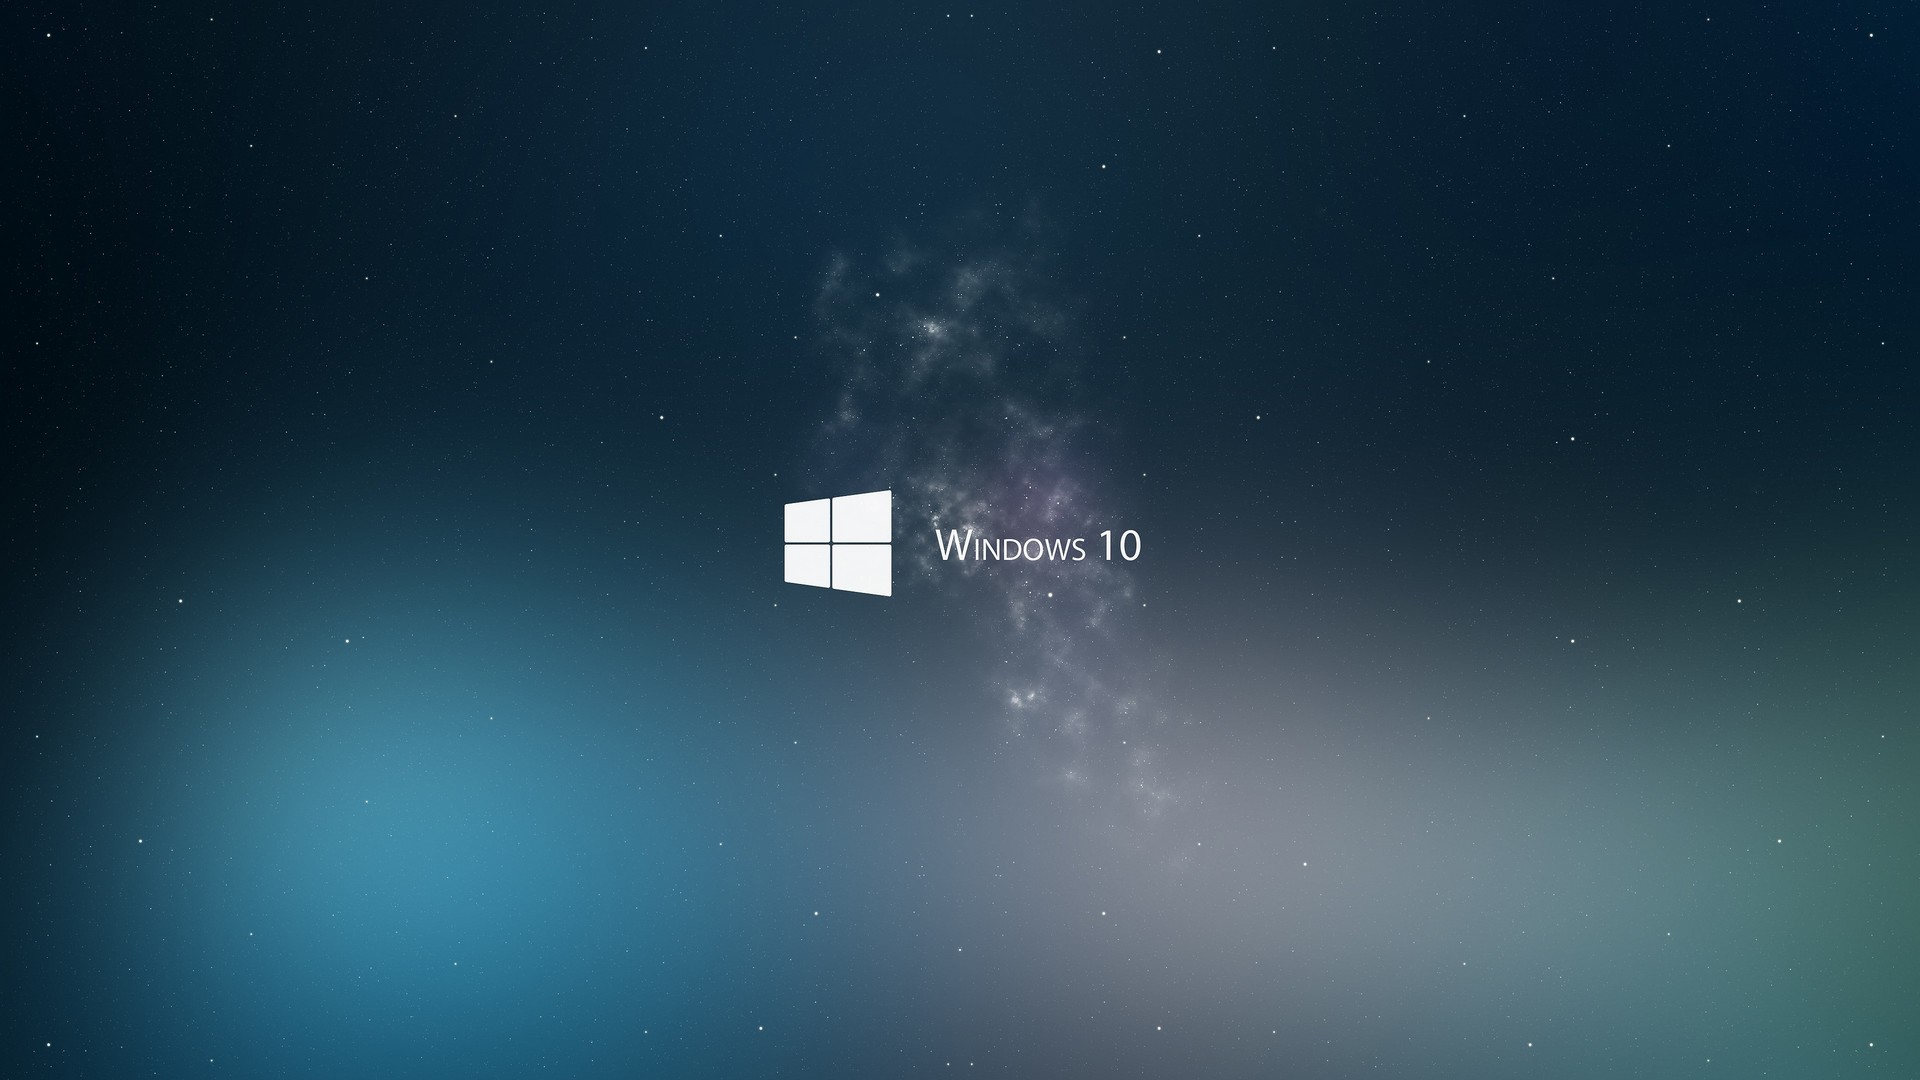 Windows 10 HD Wallpaper With high-resolution 1920X1080 pixel. You can use this wallpaper for your Desktop Computer Backgrounds, Mac Wallpapers, Android Lock screen or iPhone Screensavers and another smartphone device